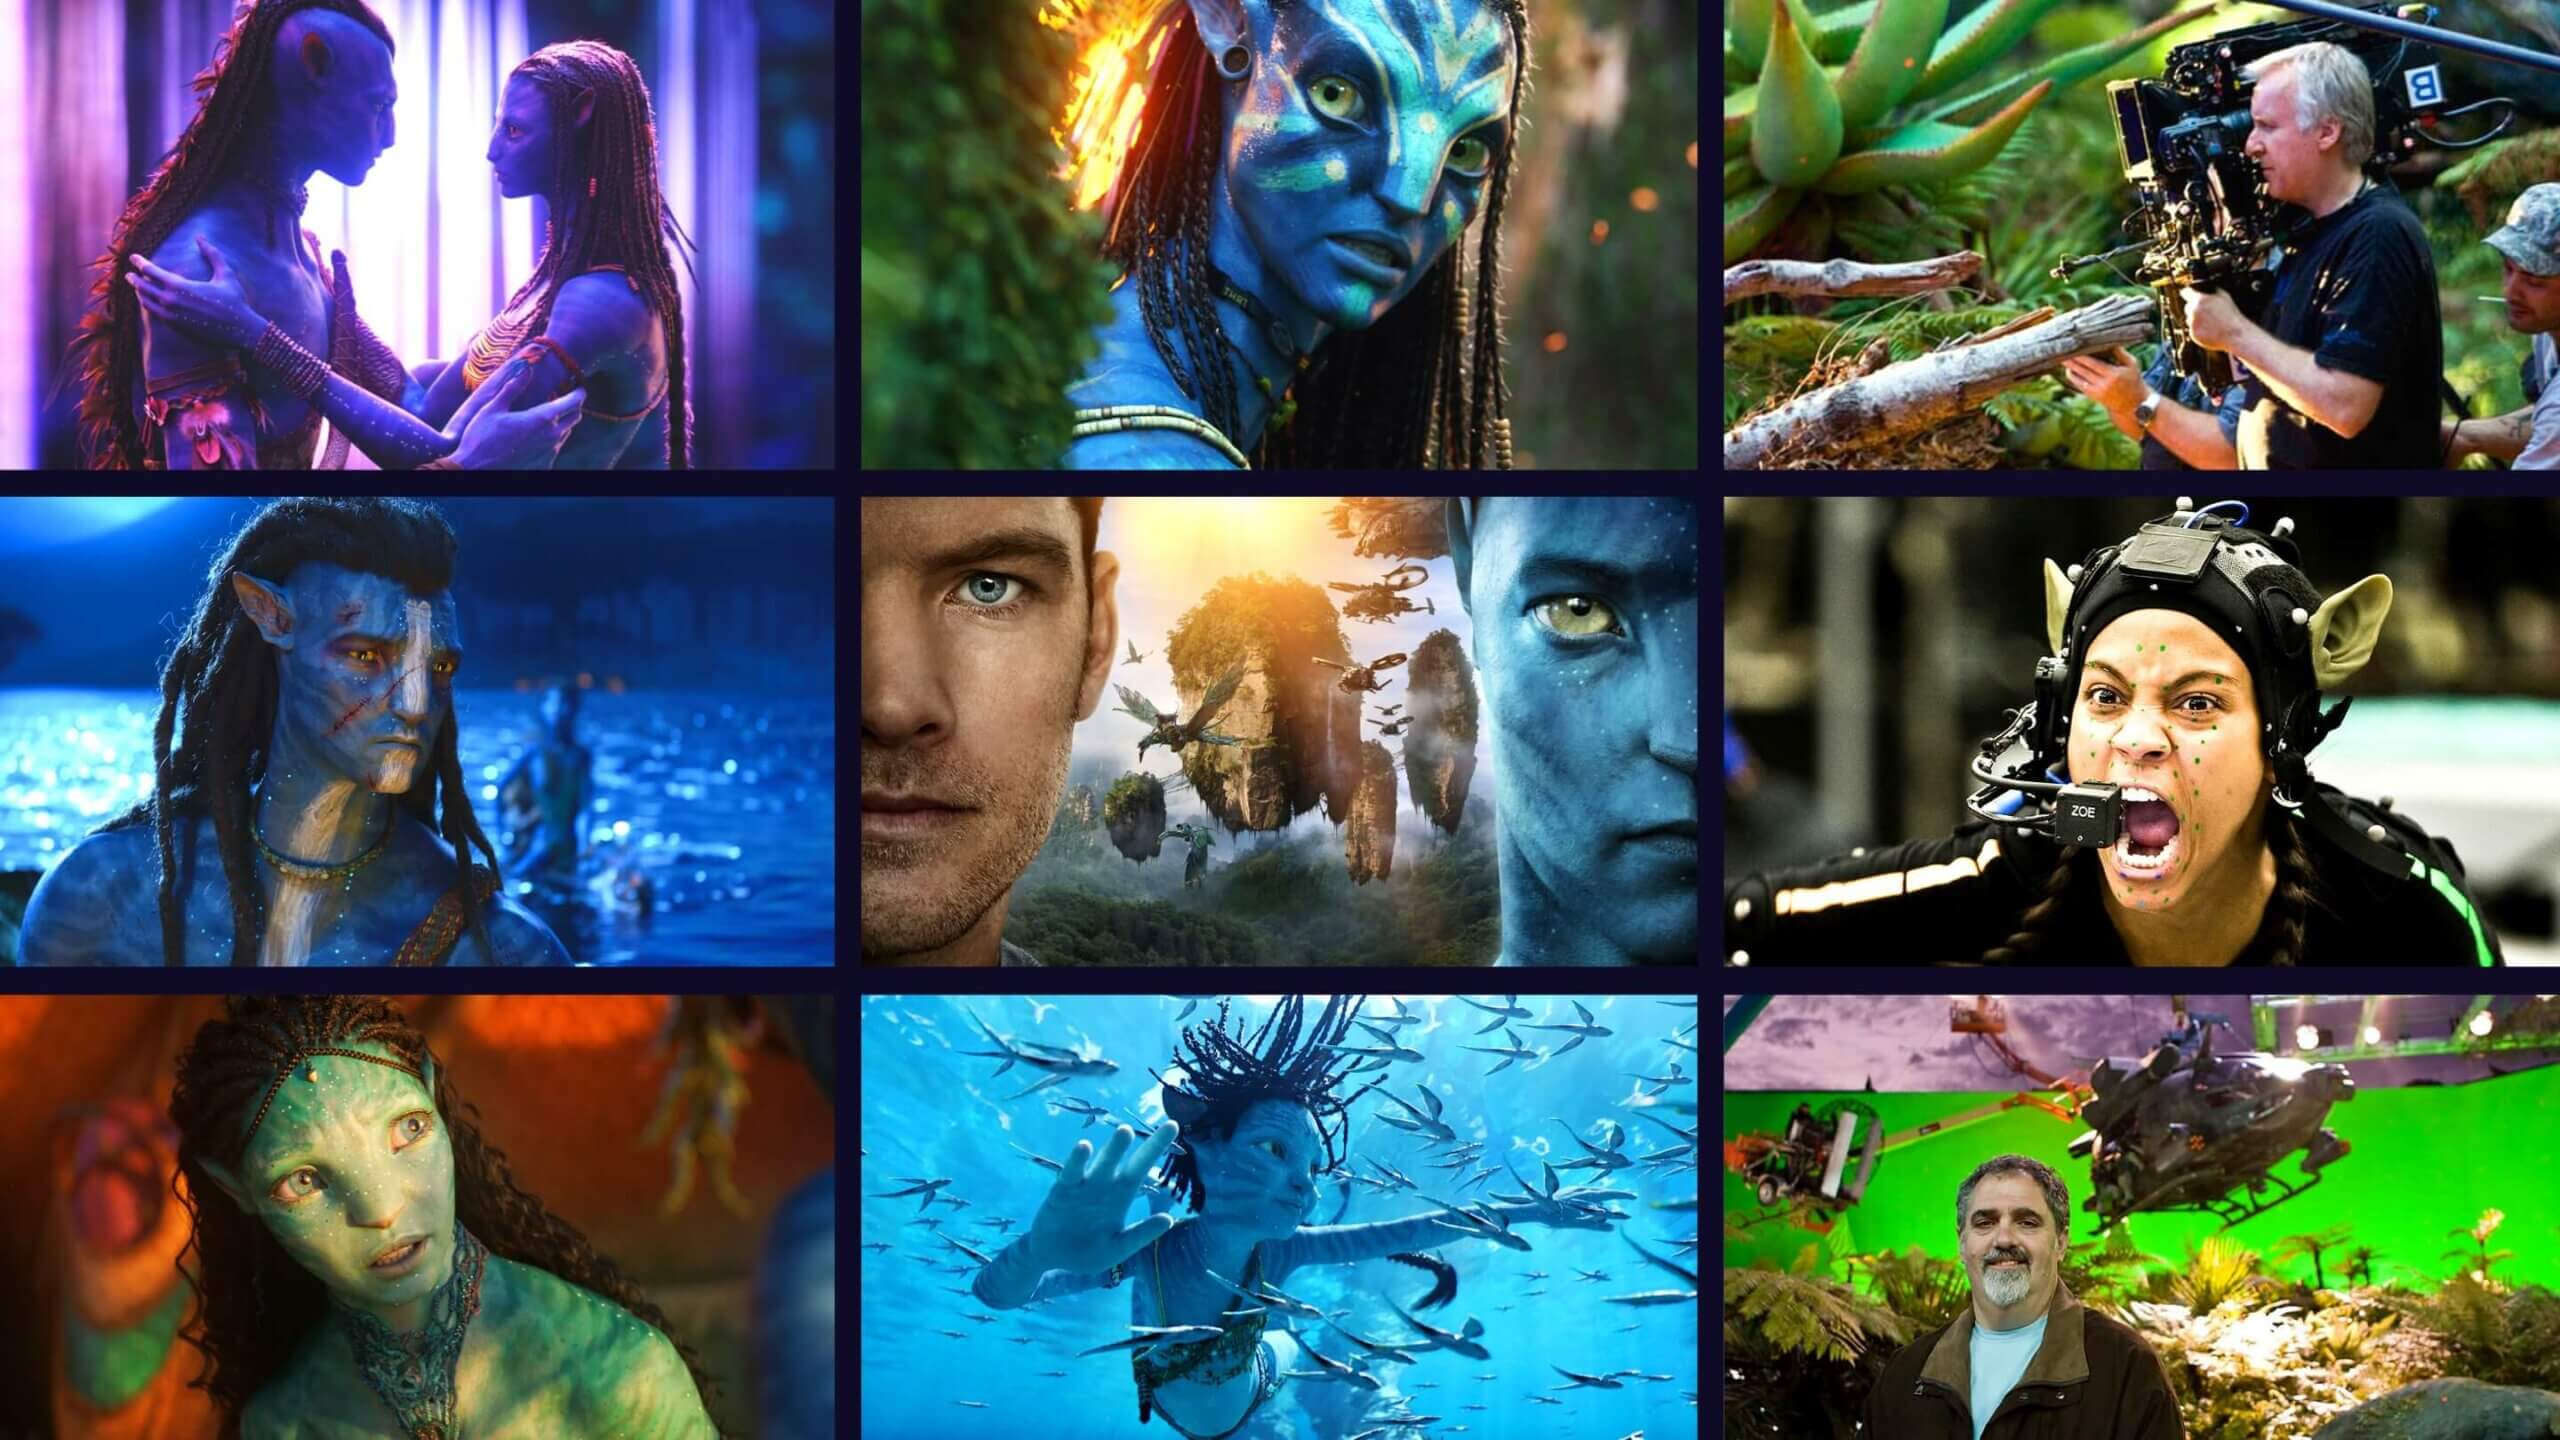 James Camerons Avatar sequels are a huge risk for Disney